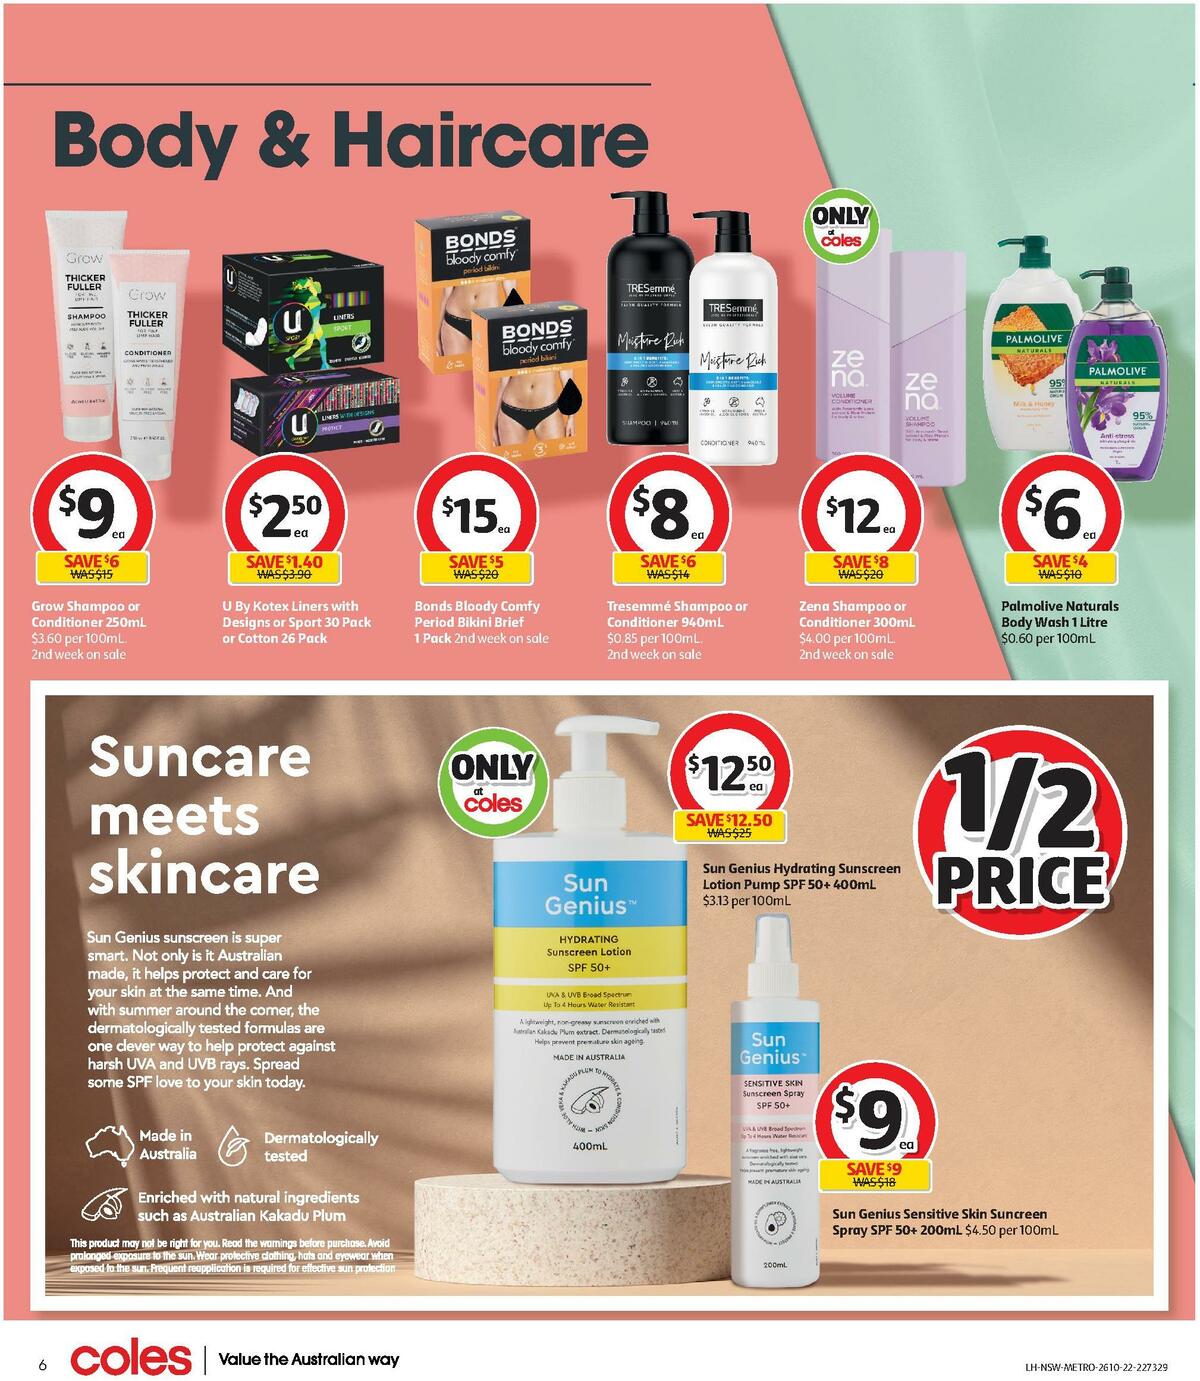 Coles Health & Beauty Catalogues from 26 October